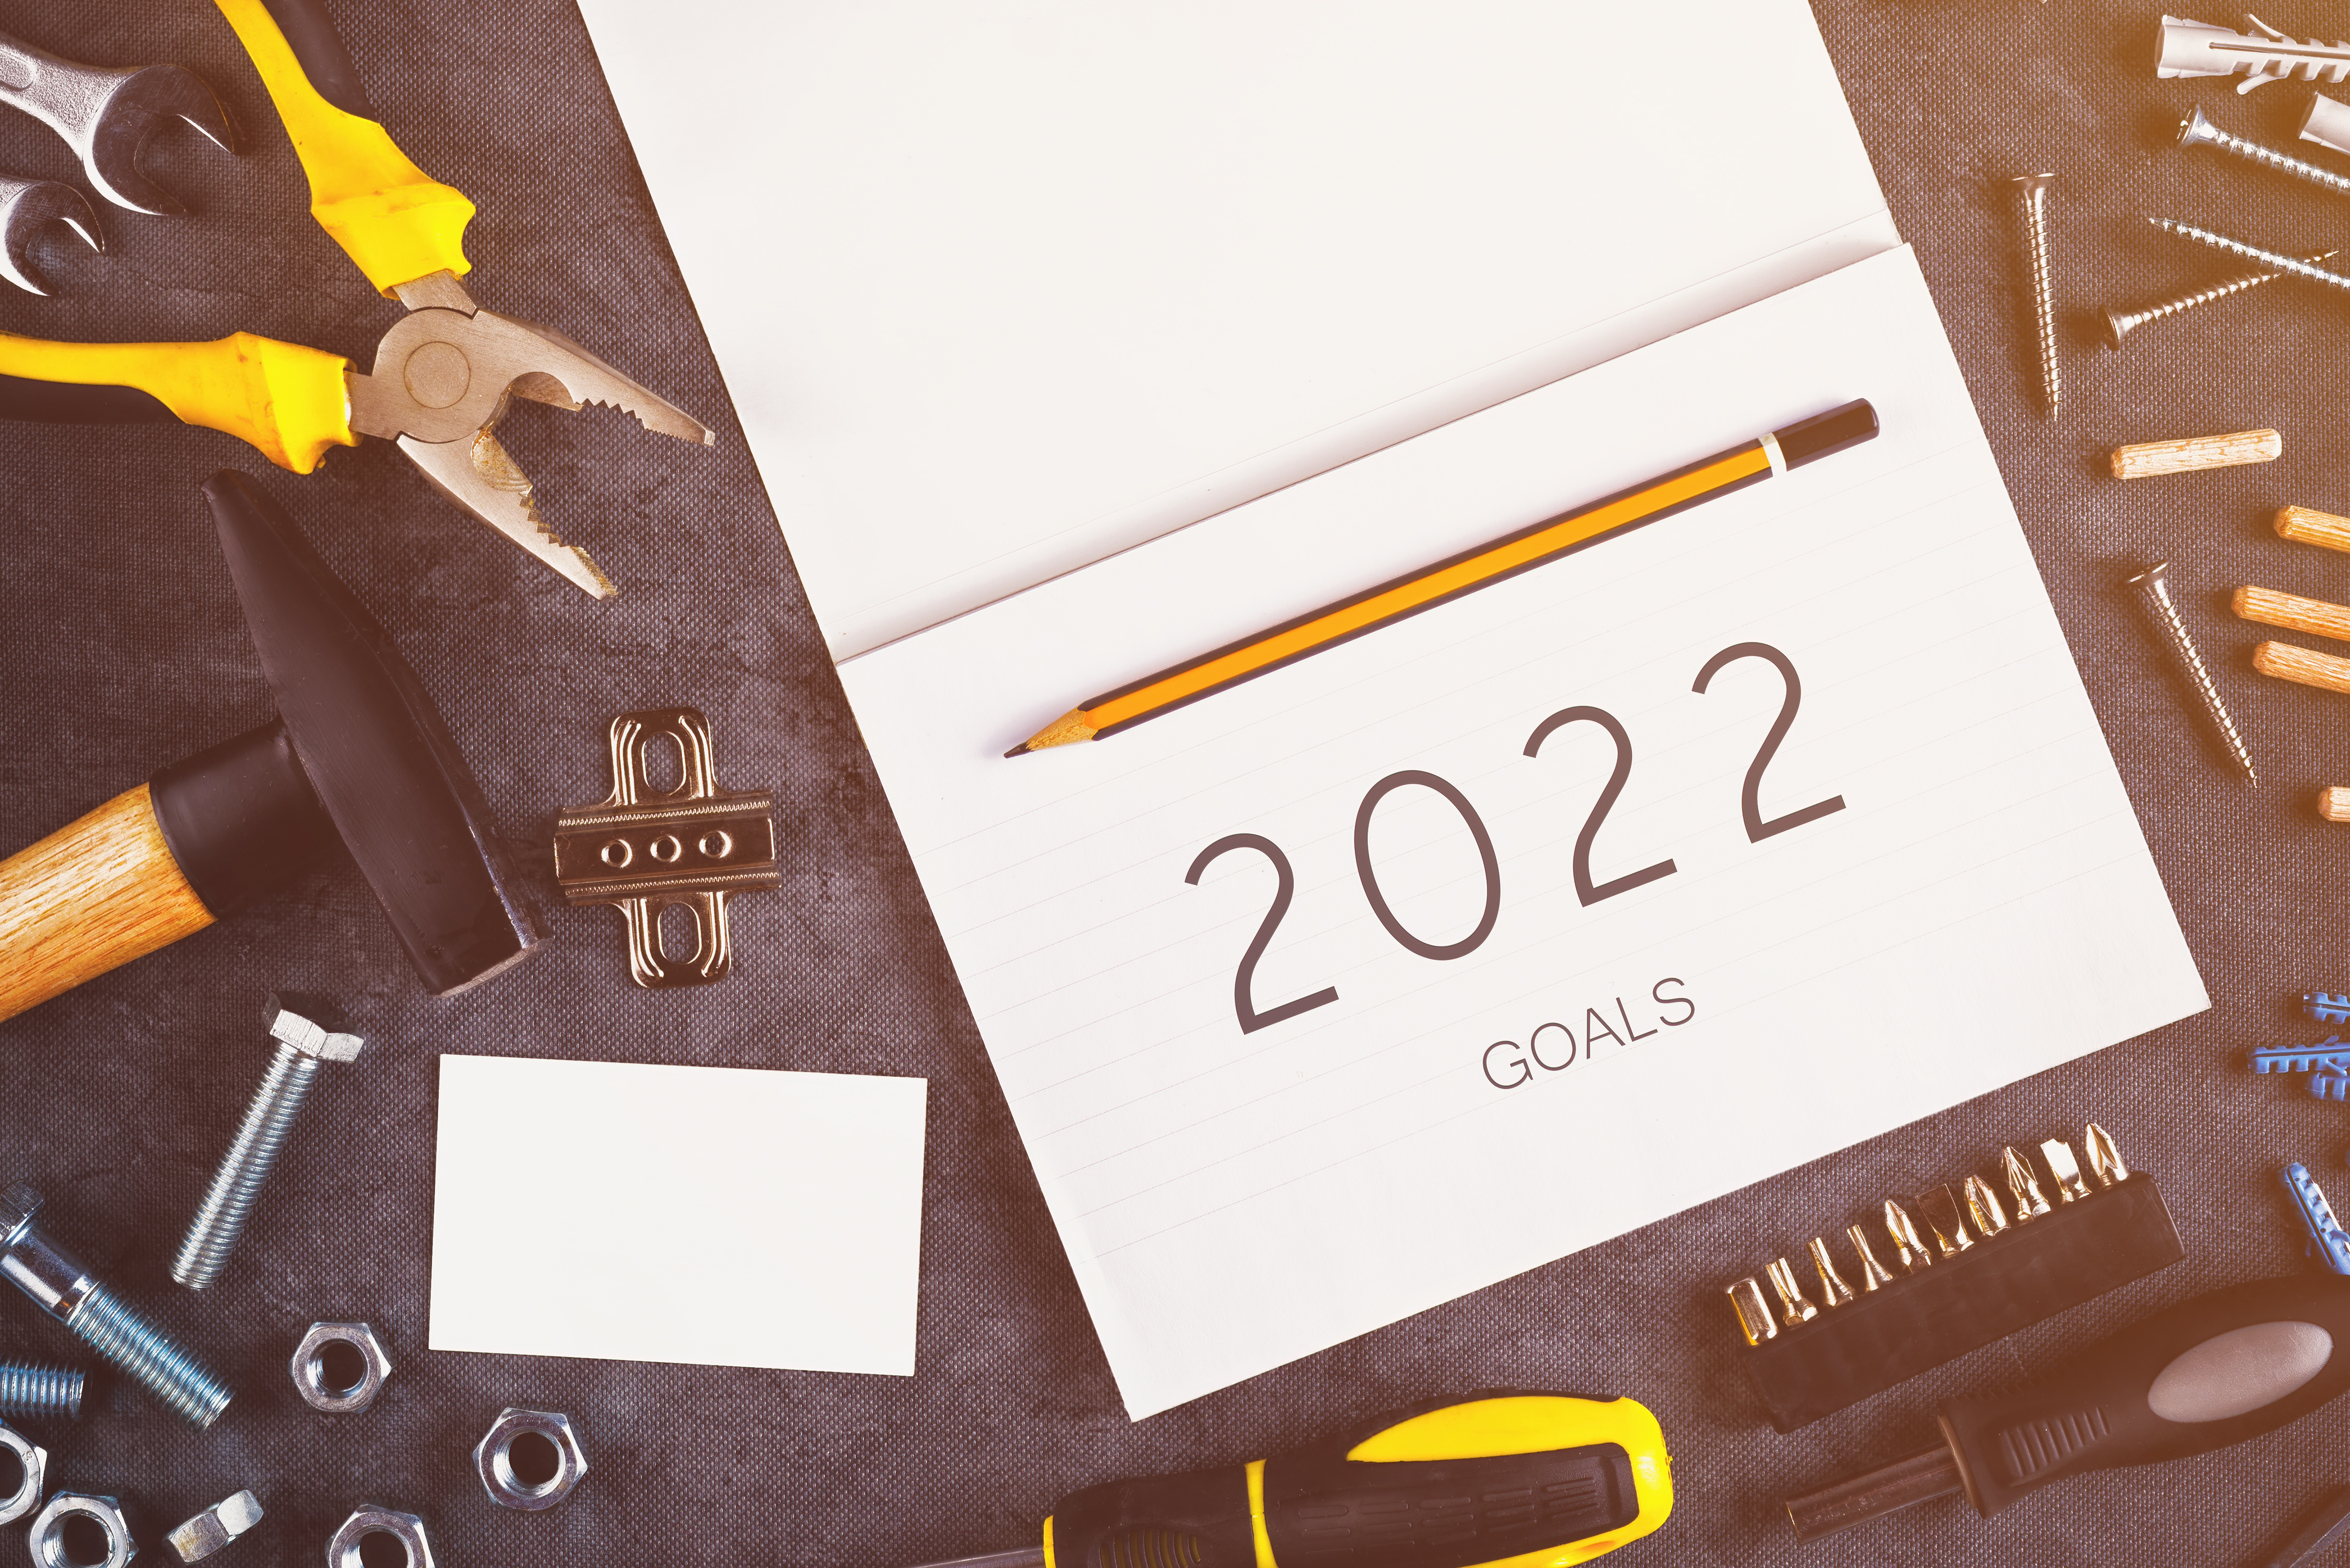 2022 Goals, assorted Do It Yourself DIY tools and notebook on desk in workshop